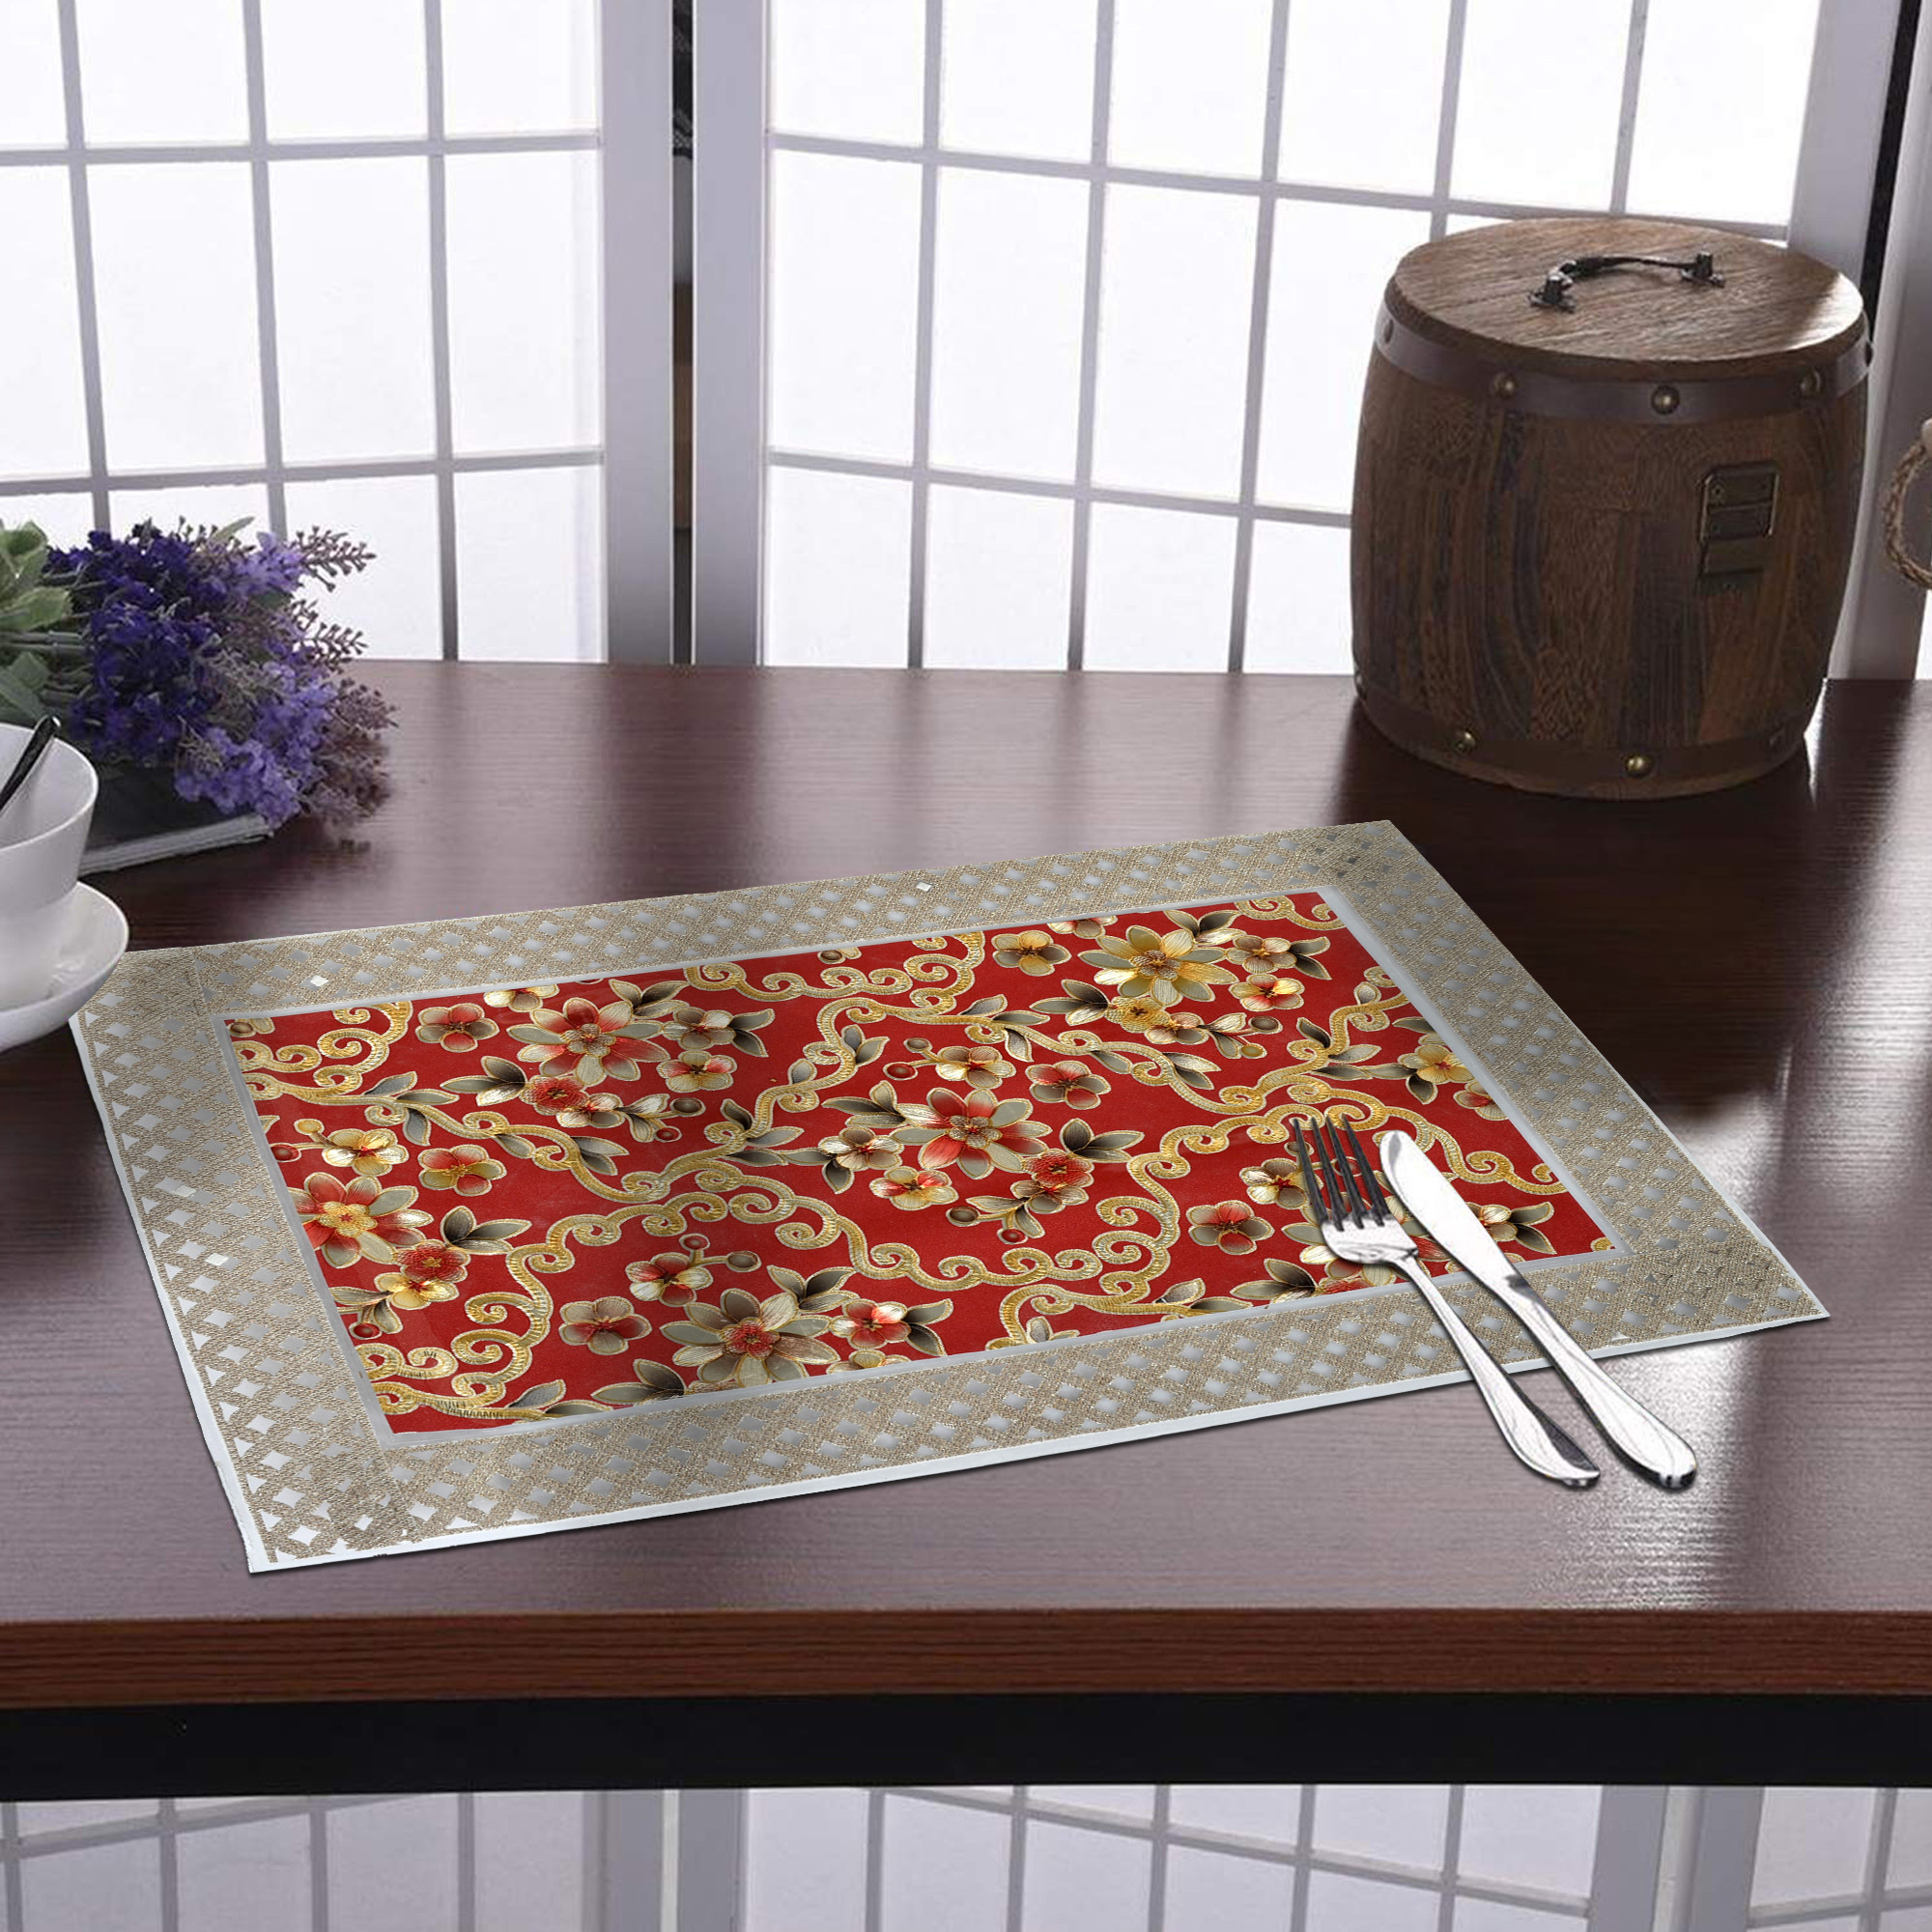 Kuber Industries Flower Design PVC Dining Table Placemat Set, Set of 6 (Maroon)